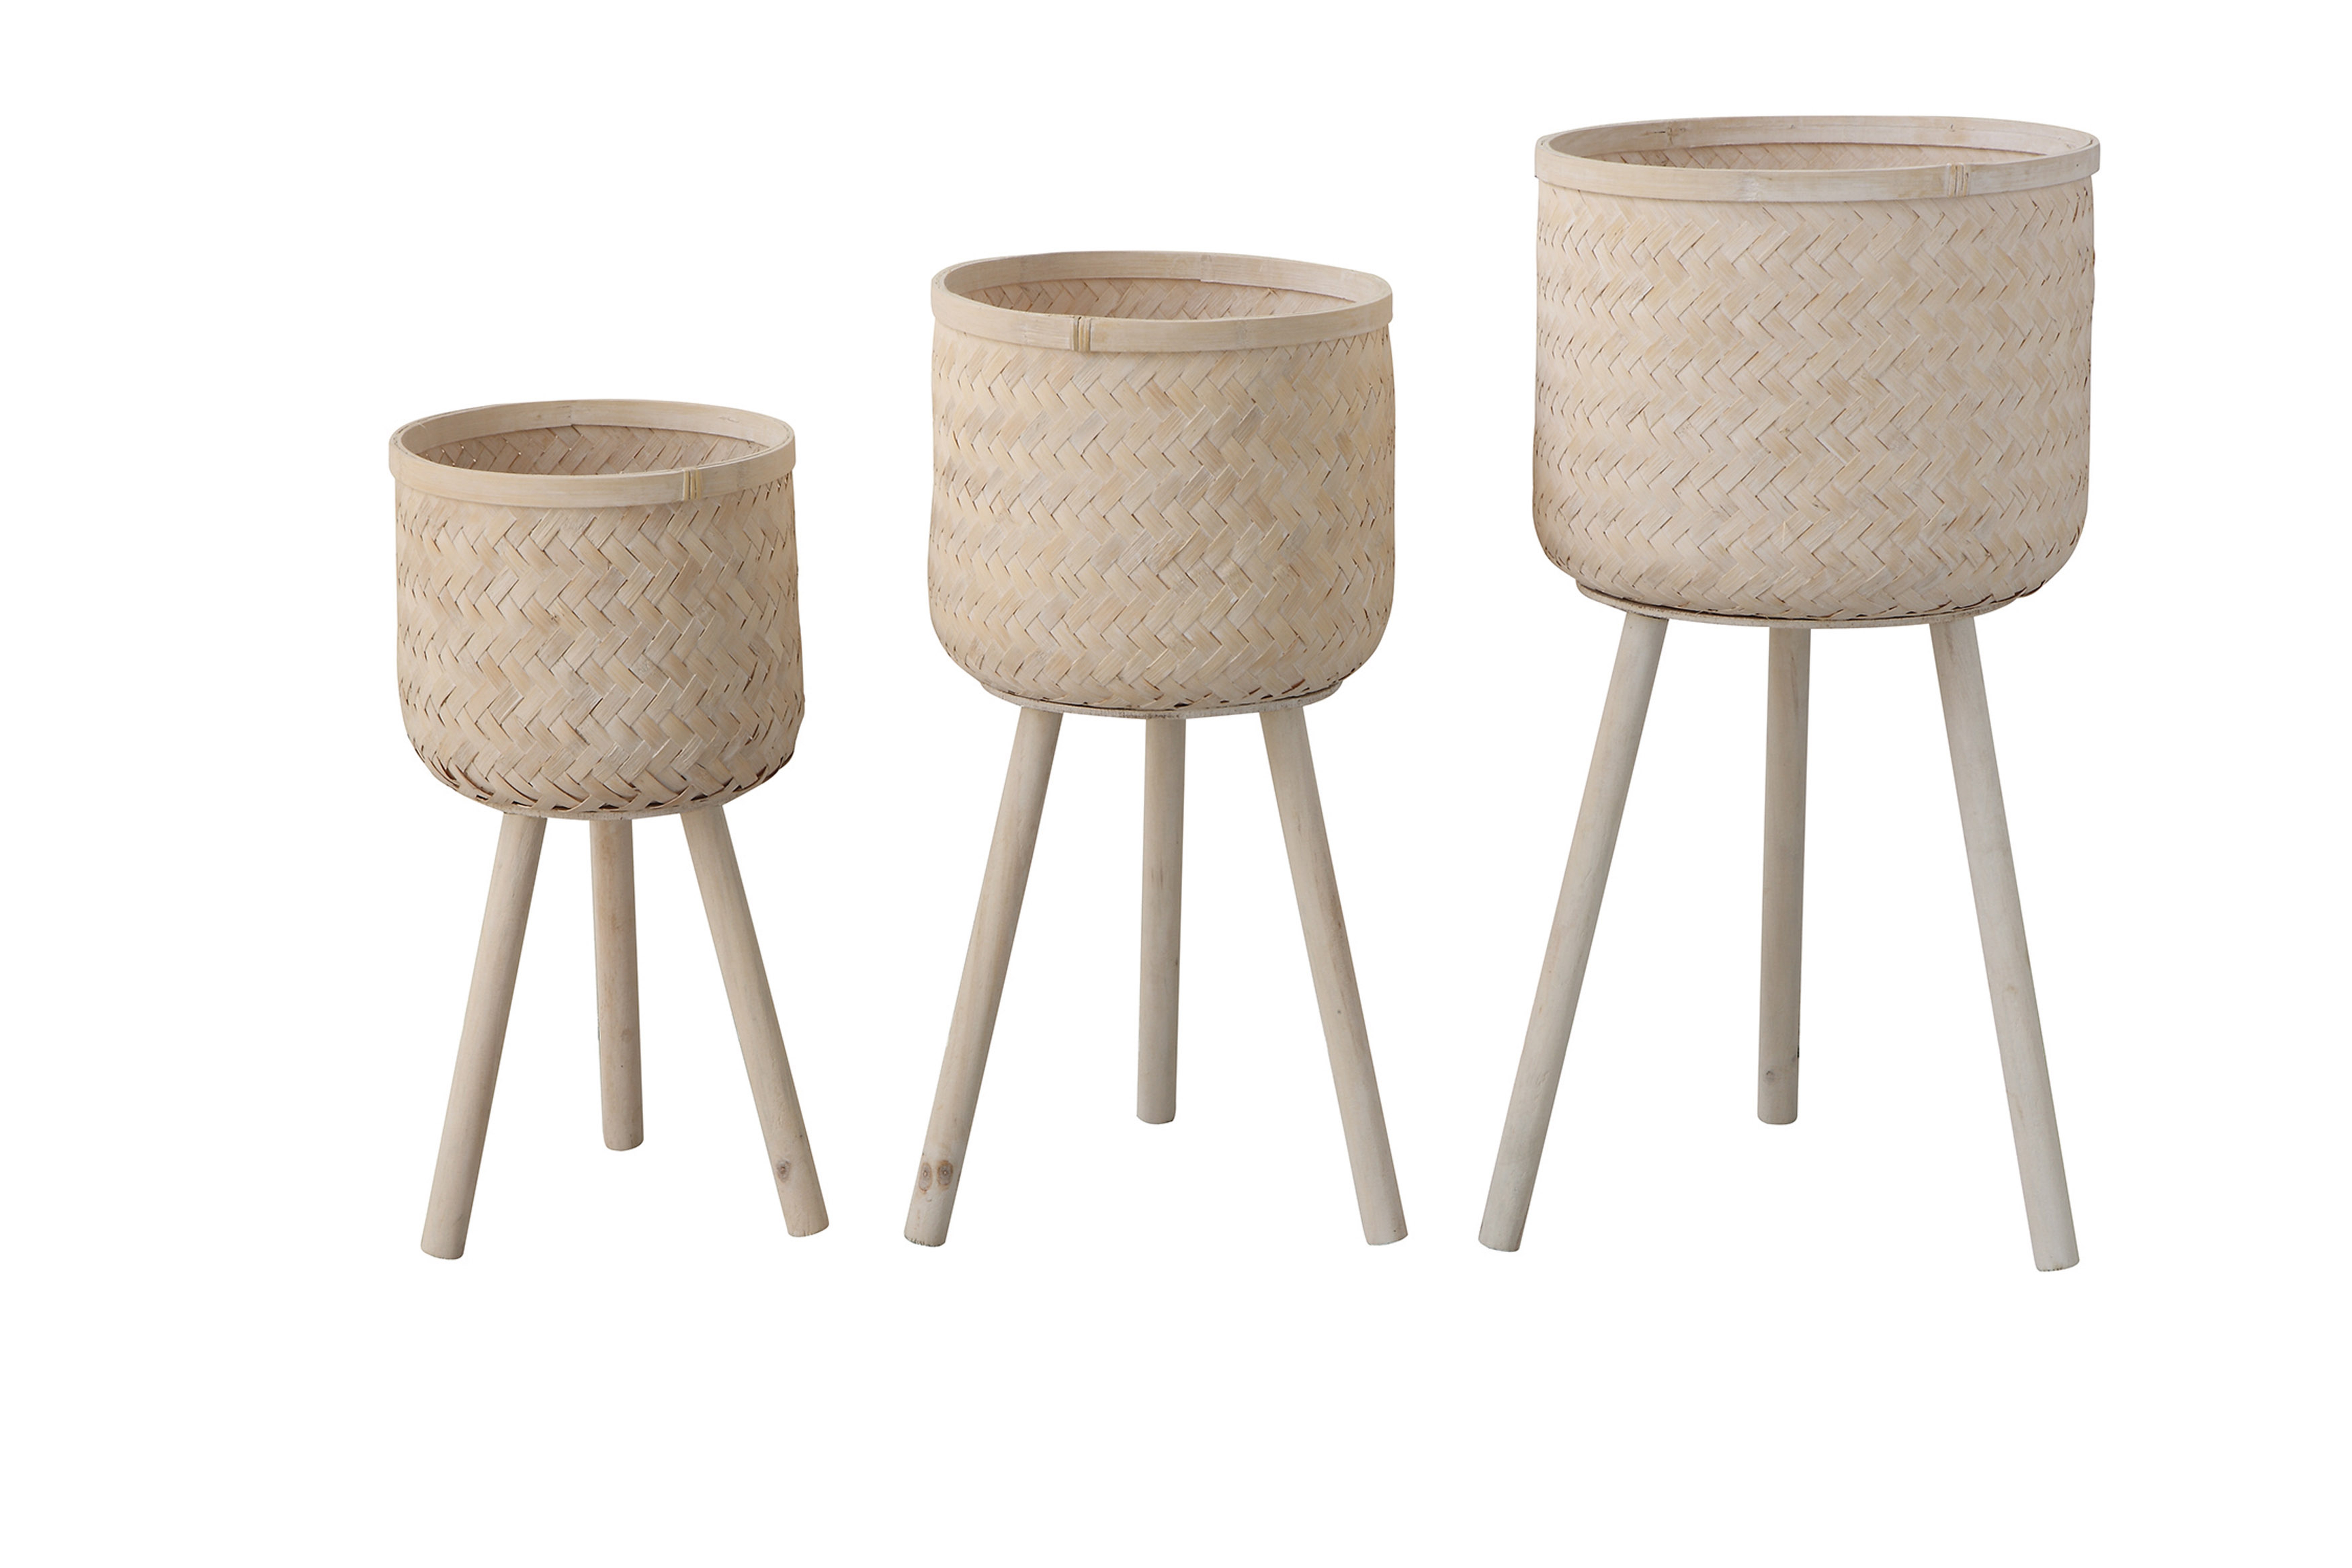 Bamboo Floor Baskets with Wood Legs, Whitewashed, Set of 3 - Moss & Wilder